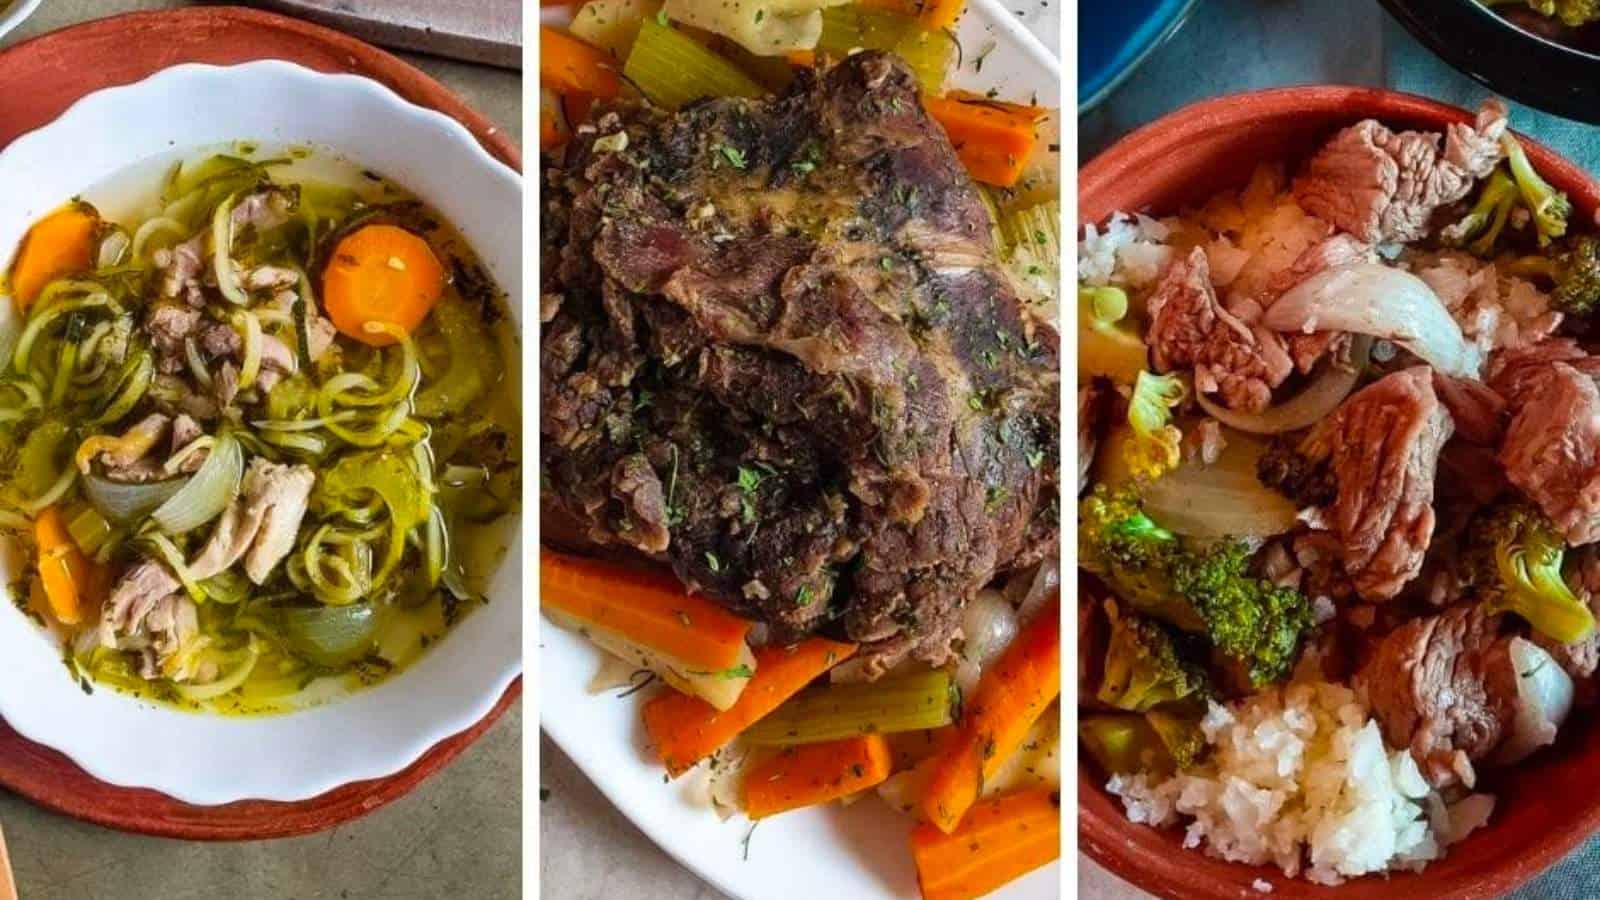 Three pictures of meat and vegetables on a plate.